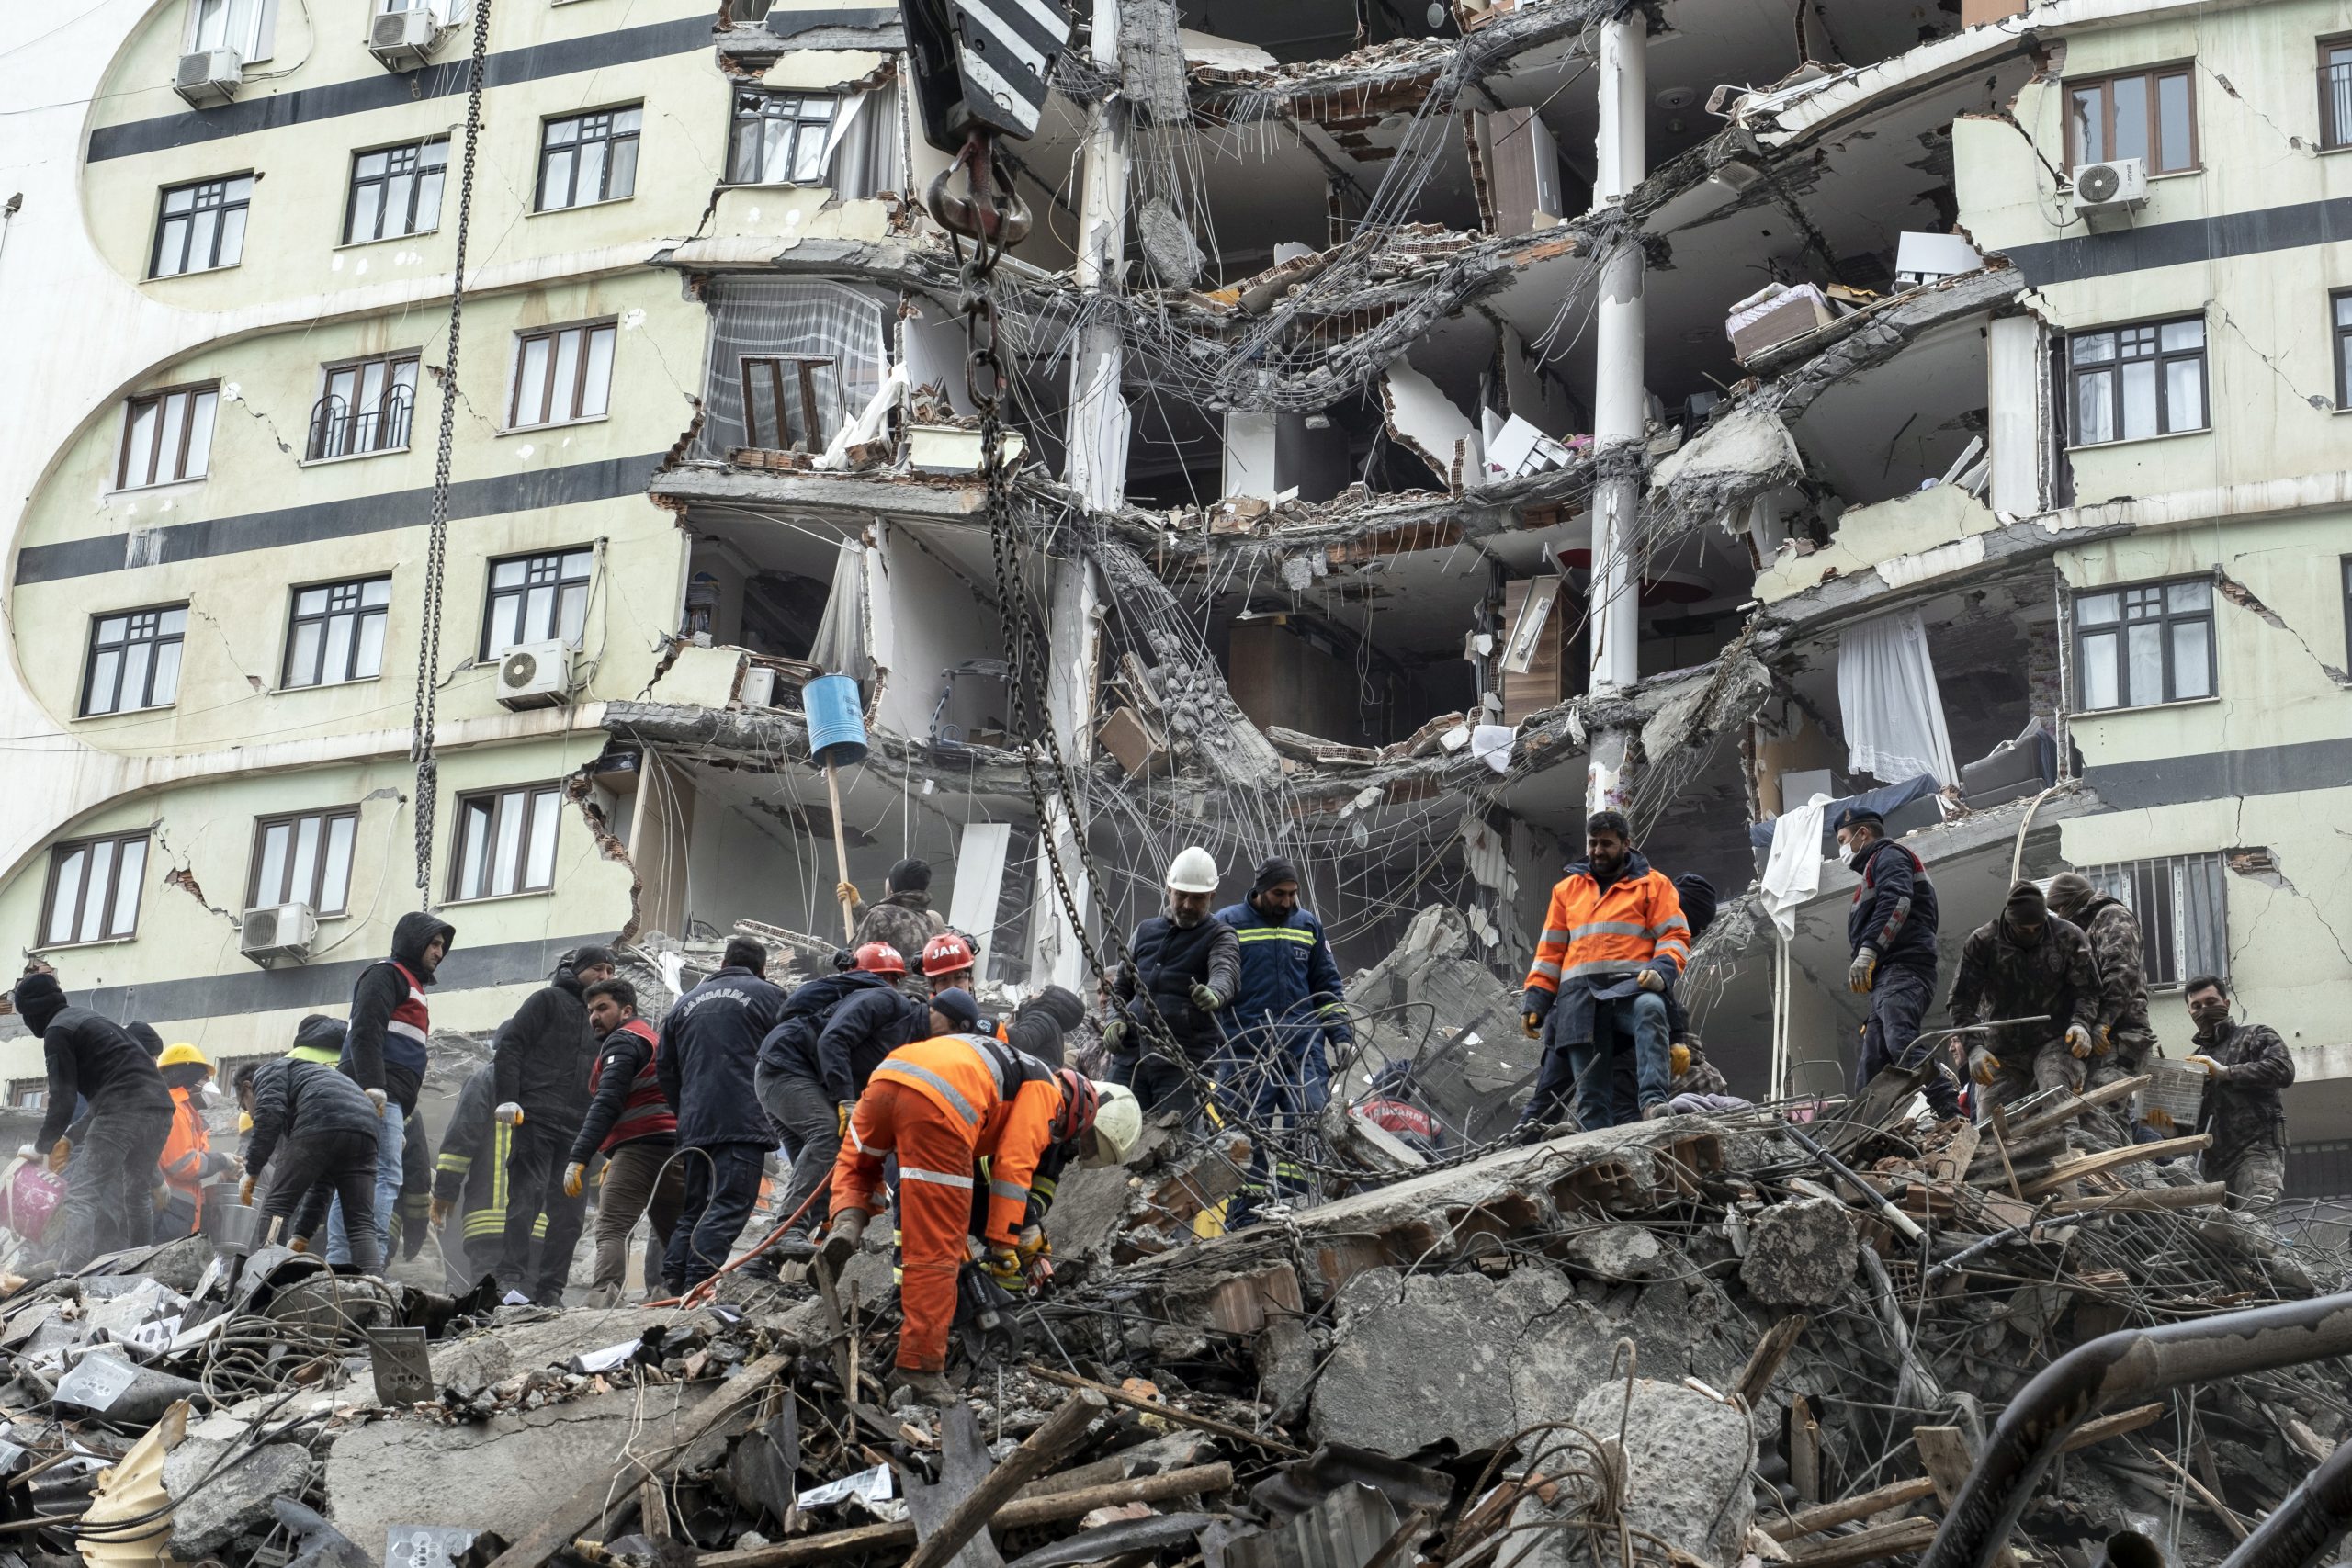 epa10451242  Emergency personnel search for victims at the site of a collapsed building after an earthquake in Diyarbakir, southeast of Turkey, 06 February 2023. According to the US Geological Service, an earthquake with a preliminary magnitude of 7.8 struck southern Turkey close to the Syrian border. The earthquake caused buildings to collapse and sent shockwaves over northwest Syria, Cyprus, and Lebanon. Hundreds of people have died and more than seven thousand have been injured in Turkey, according to AFAD, Turkish Disaster and Emergency Management Presidency.  EPA/REFIK TEKIN